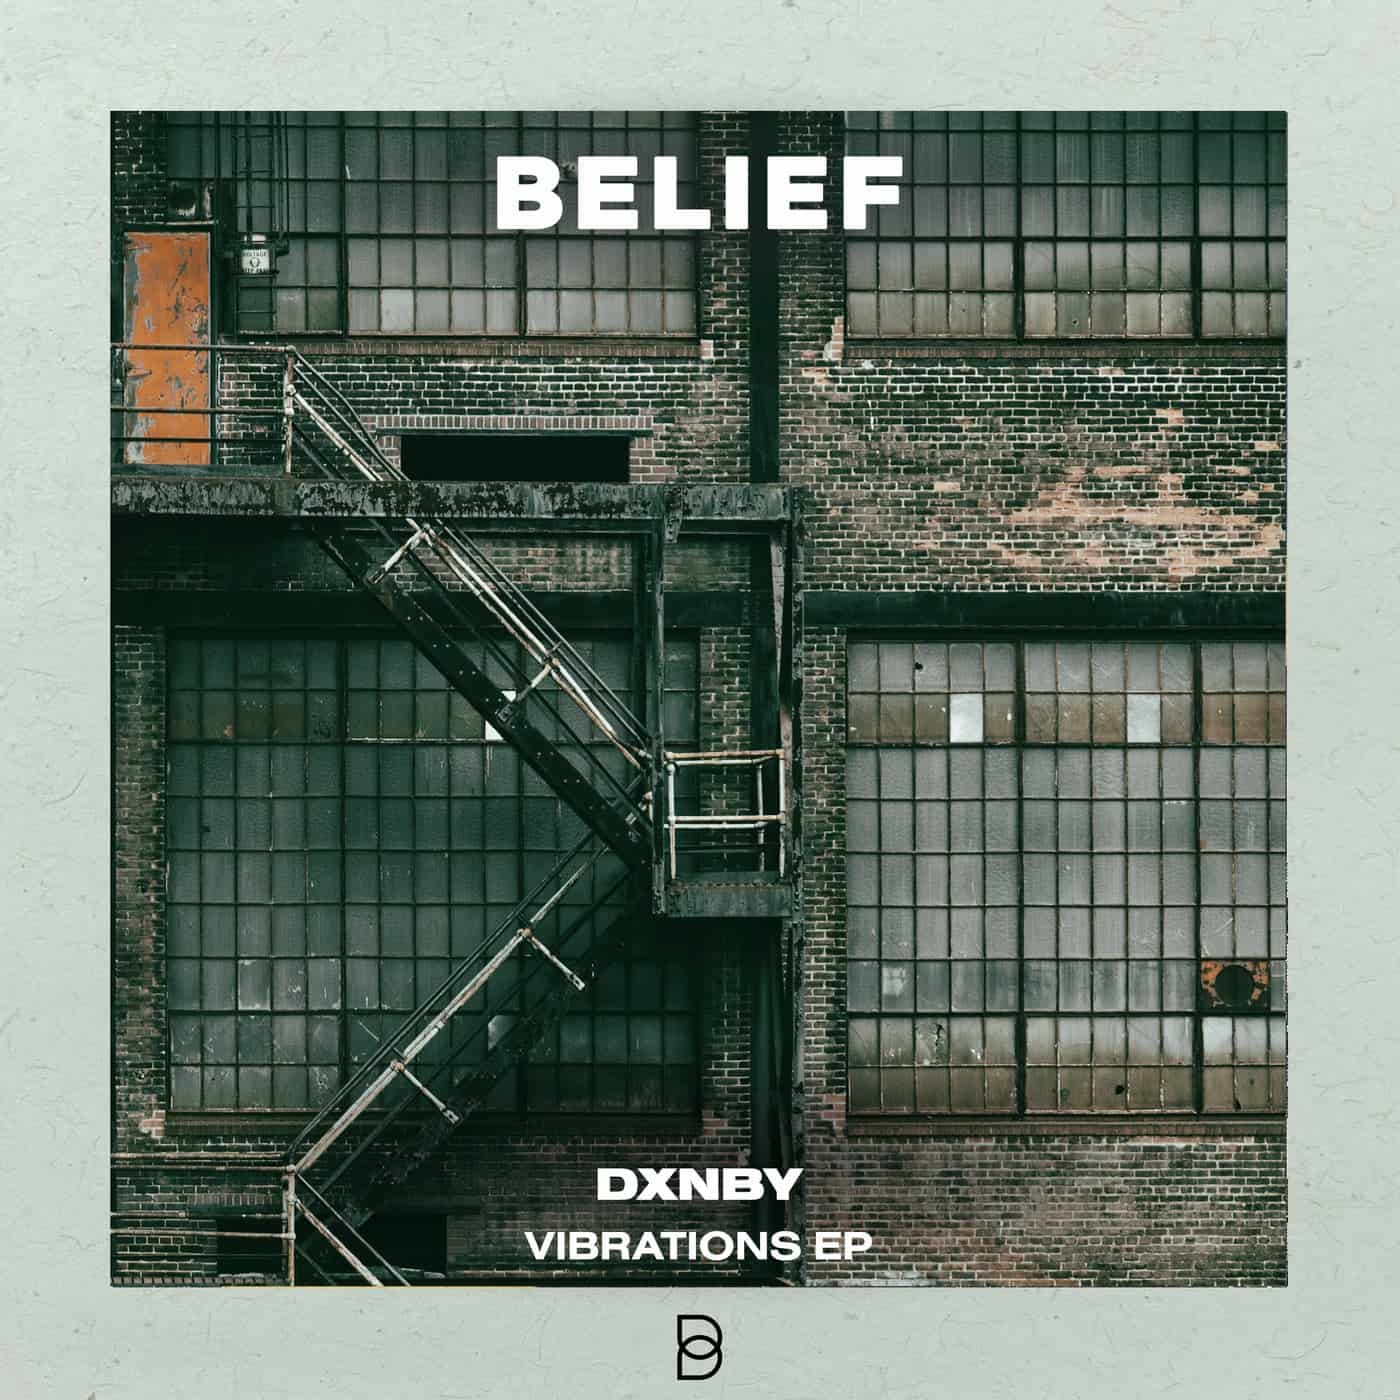 image cover: Vibrations EP by DXNBY on Belief